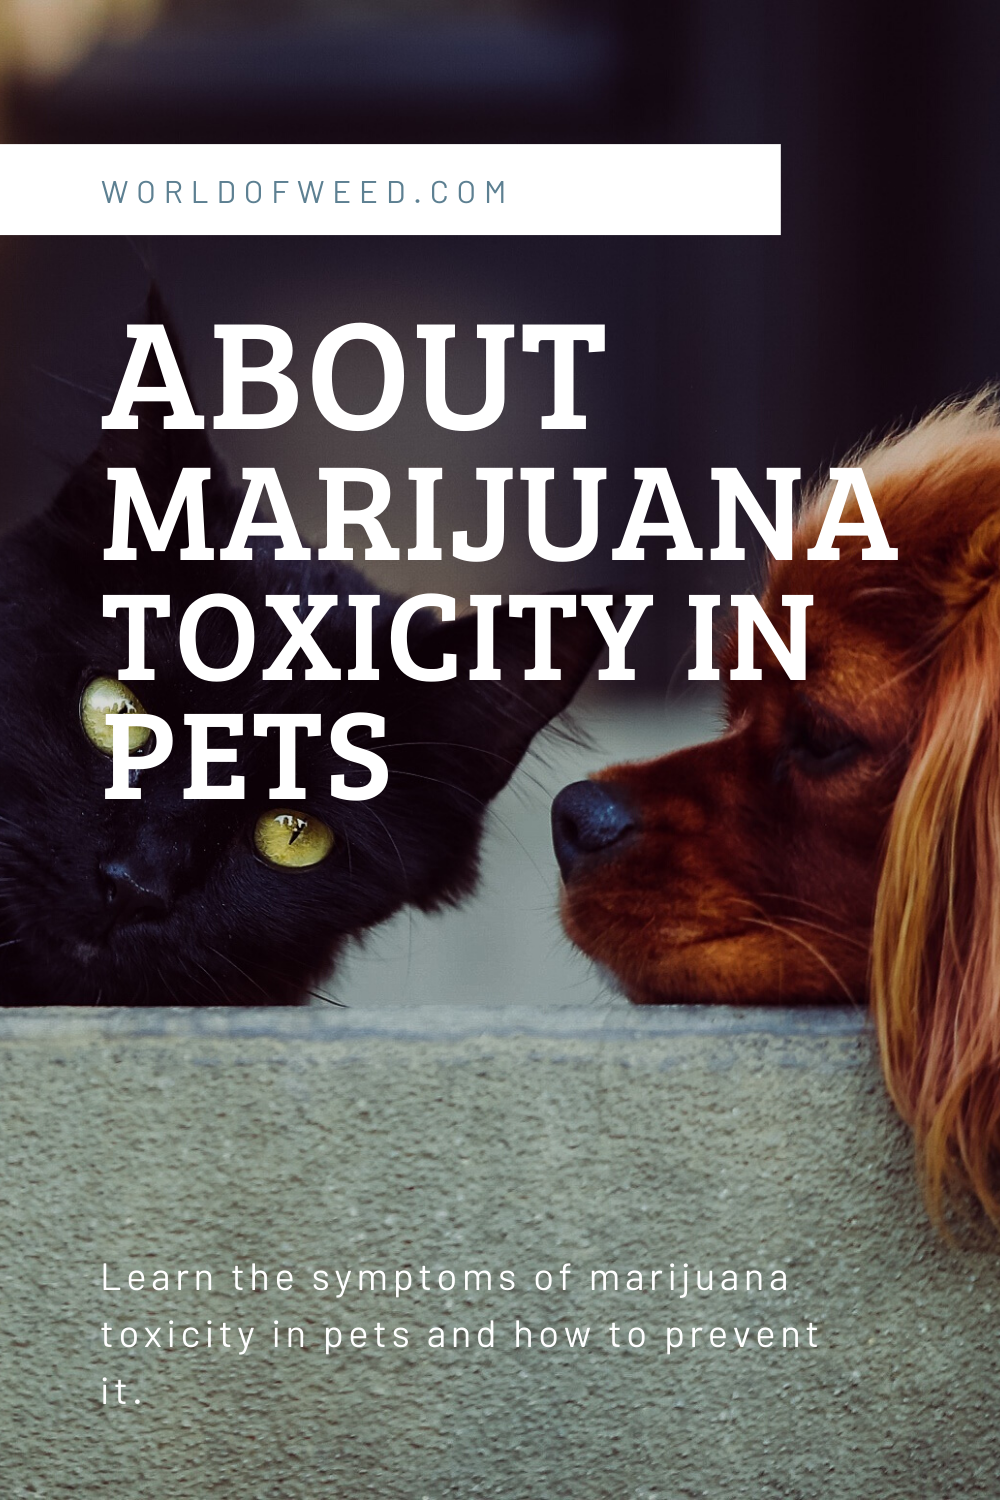 About Marijuana Toxicity in Pets